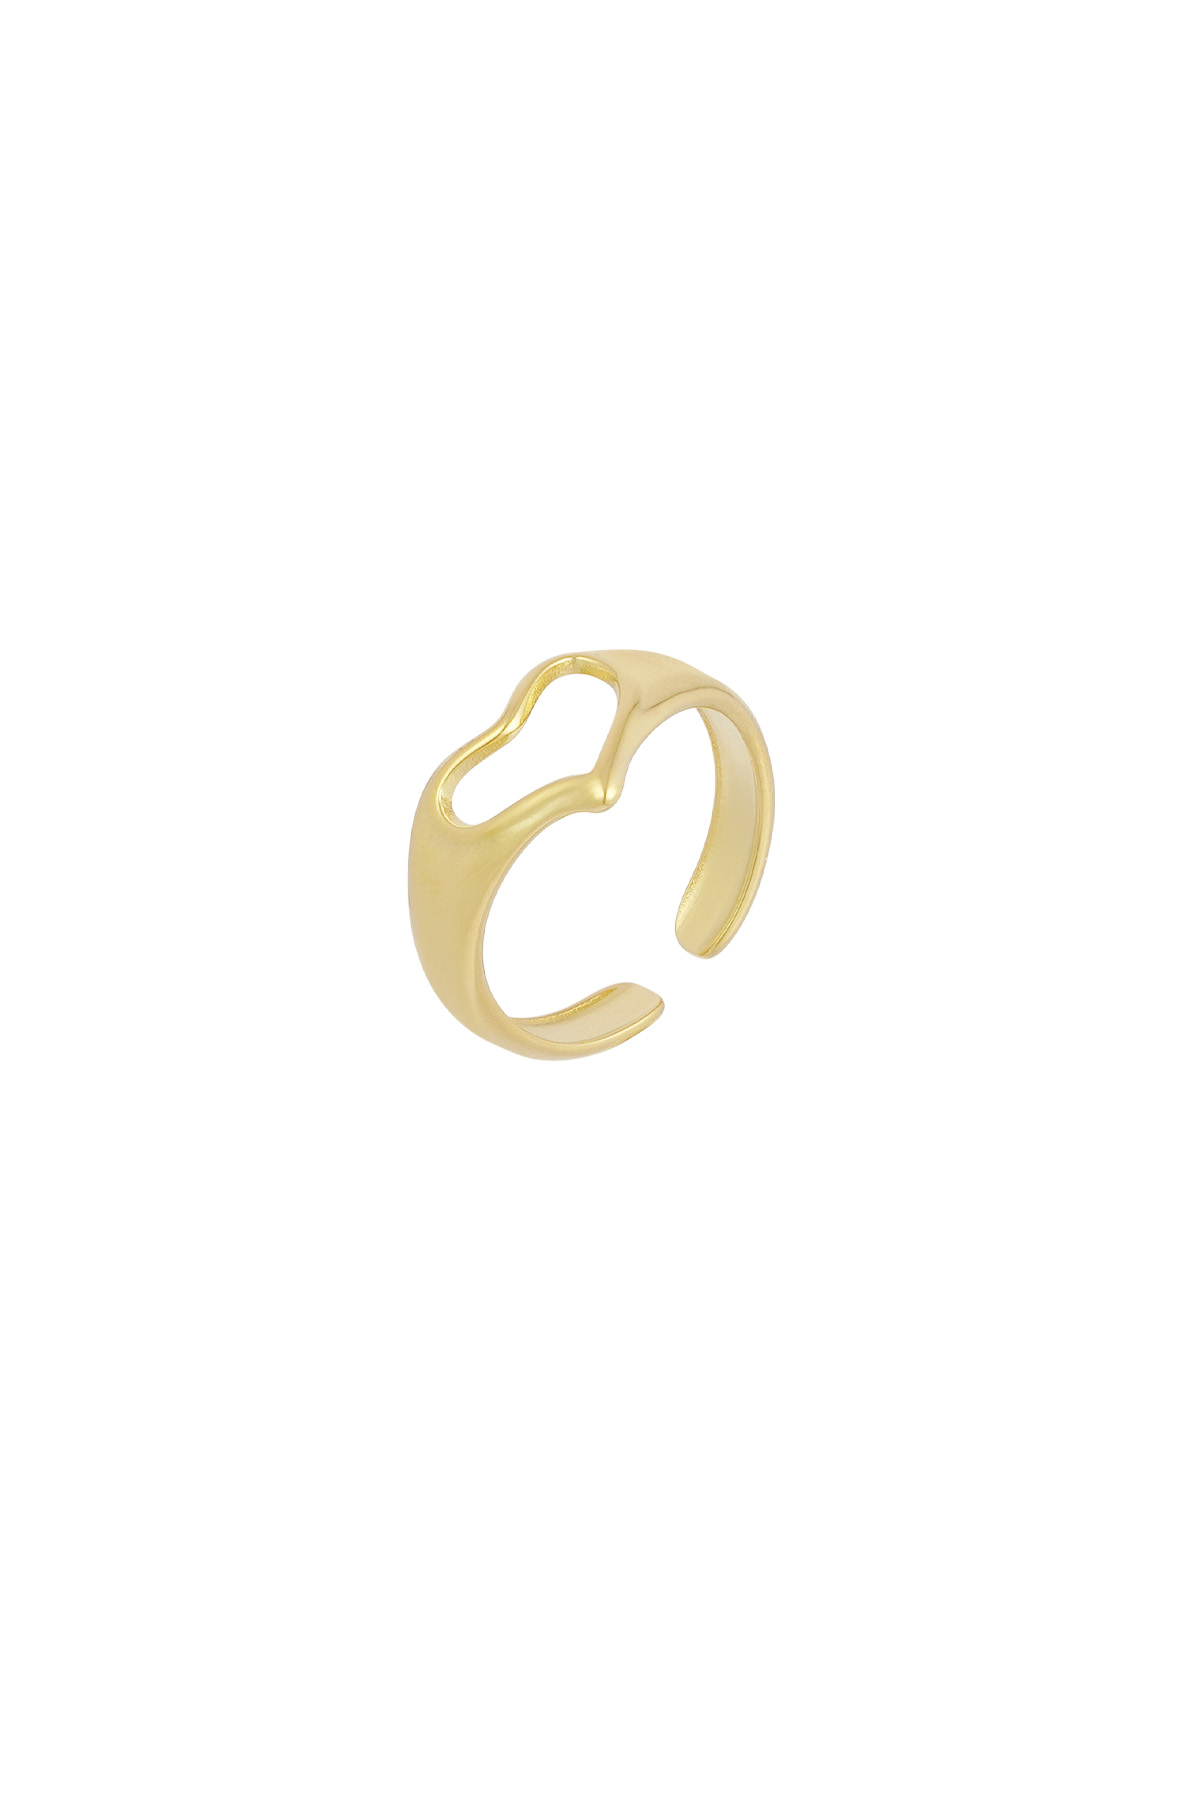 Ring love hands - gold Picture3